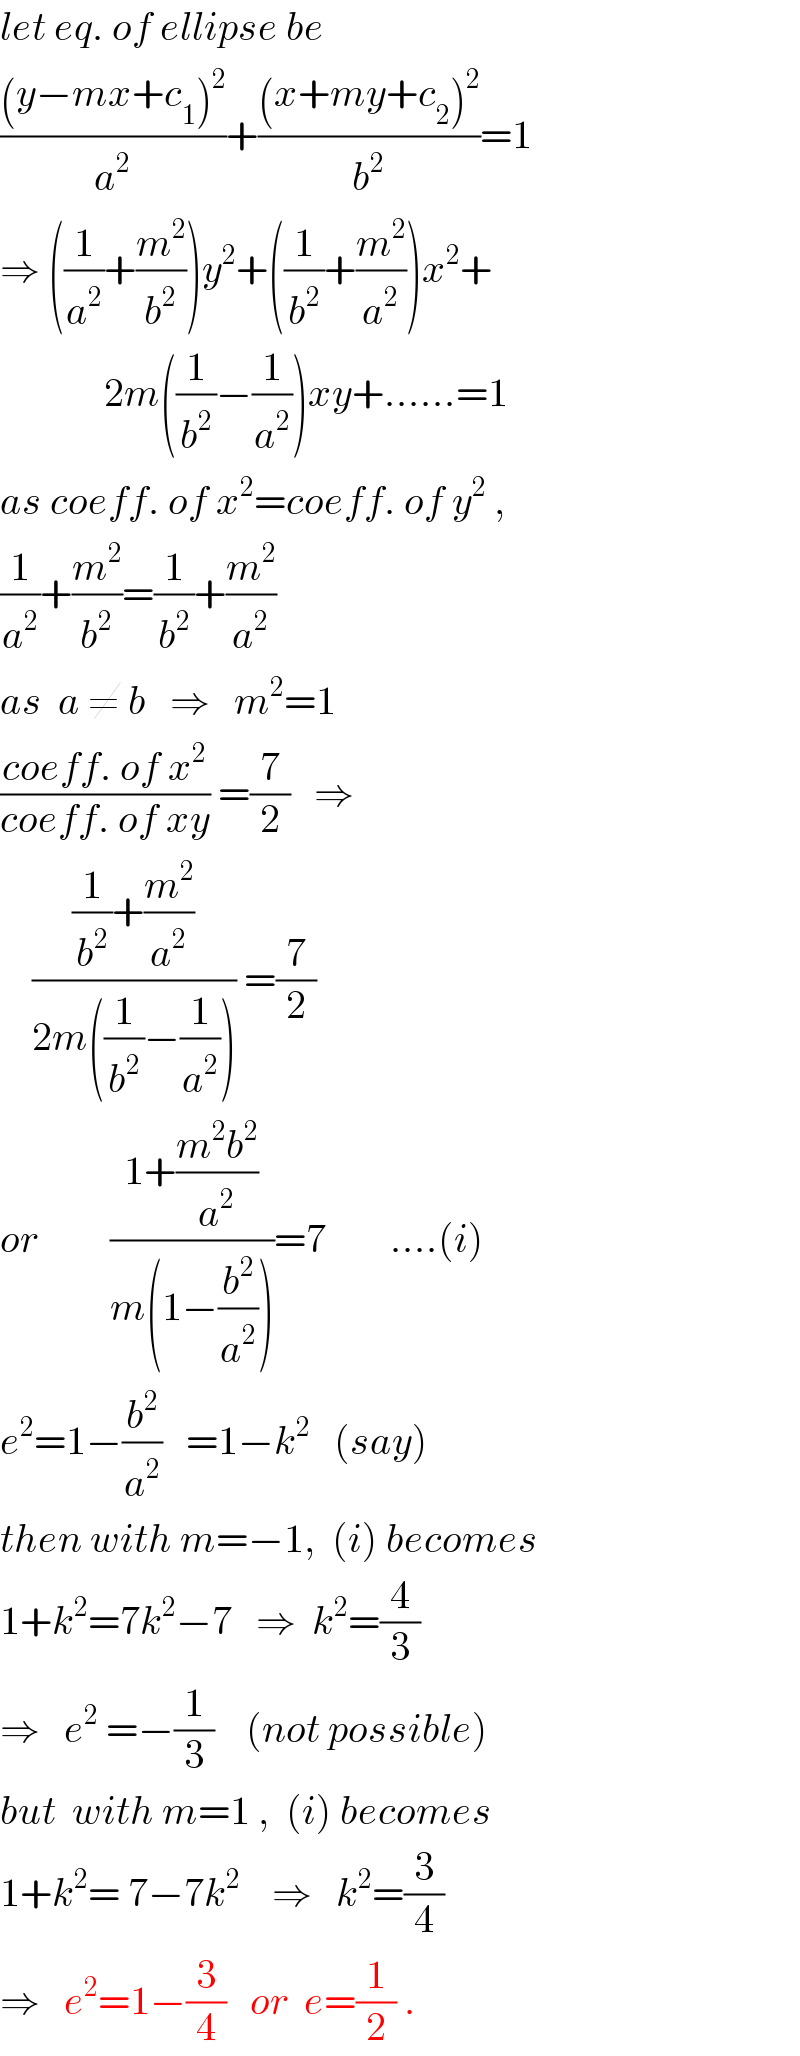 let eq. of ellipse be  (((y−mx+c_1 )^2 )/a^2 )+(((x+my+c_2 )^2 )/b^2 )=1  ⇒ ((1/a^2 )+(m^2 /b^2 ))y^2 +((1/b^2 )+(m^2 /a^2 ))x^2 +               2m((1/b^2 )−(1/a^2 ))xy+......=1  as coeff. of x^2 =coeff. of y^2  ,   (1/a^2 )+(m^2 /b^2 )=(1/b^2 )+(m^2 /a^2 )  as  a ≠ b   ⇒   m^2 =1  ((coeff. of x^2 )/(coeff. of xy)) =(7/2)   ⇒      (((1/b^2 )+(m^2 /a^2 ))/(2m((1/b^2 )−(1/a^2 )))) =(7/2)        or         ((1+((m^2 b^2 )/a^2 ))/(m(1−(b^2 /a^2 ))))=7        ....(i)  e^2 =1−(b^2 /a^2 )   =1−k^2    (say)  then with m=−1,  (i) becomes  1+k^2 =7k^2 −7   ⇒  k^2 =(4/3)  ⇒   e^2  =−(1/3)    (not possible)  but  with m=1 ,  (i) becomes  1+k^2 = 7−7k^2     ⇒   k^2 =(3/4)  ⇒   e^2 =1−(3/4)   or  e=(1/2) .  